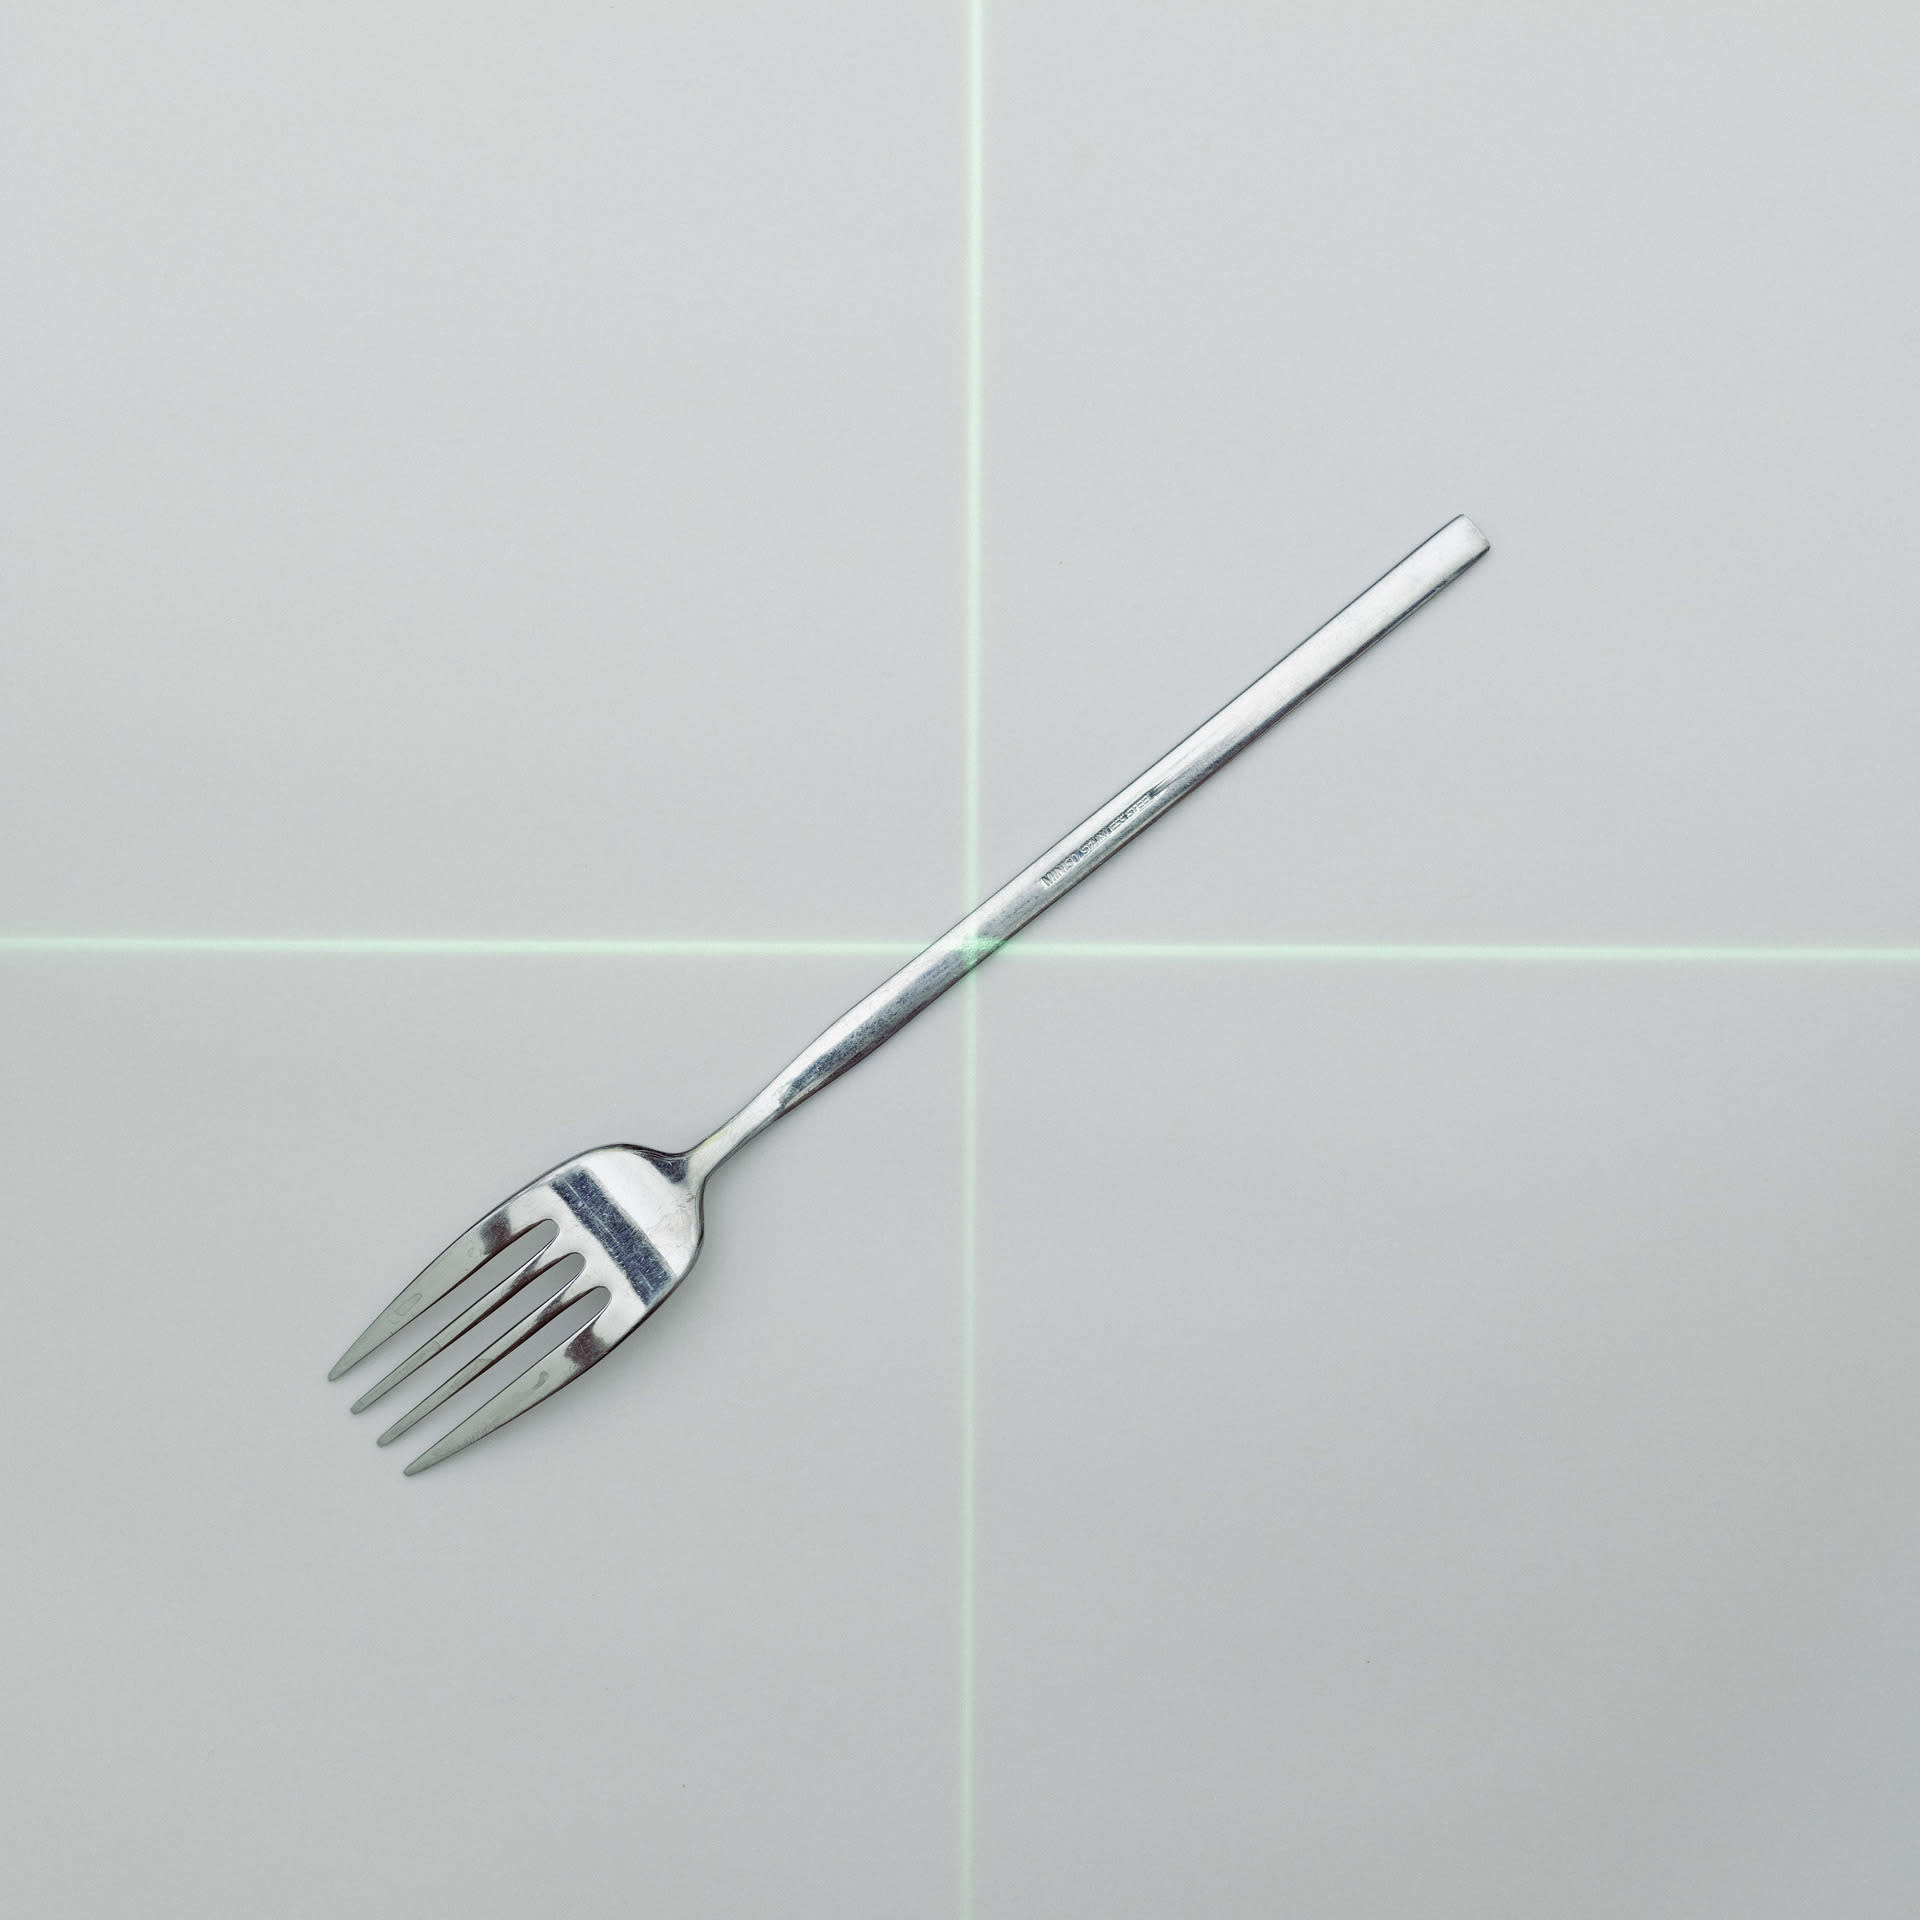 A green cross-shaped laser is projected onto a metallic fork against a pure white background.